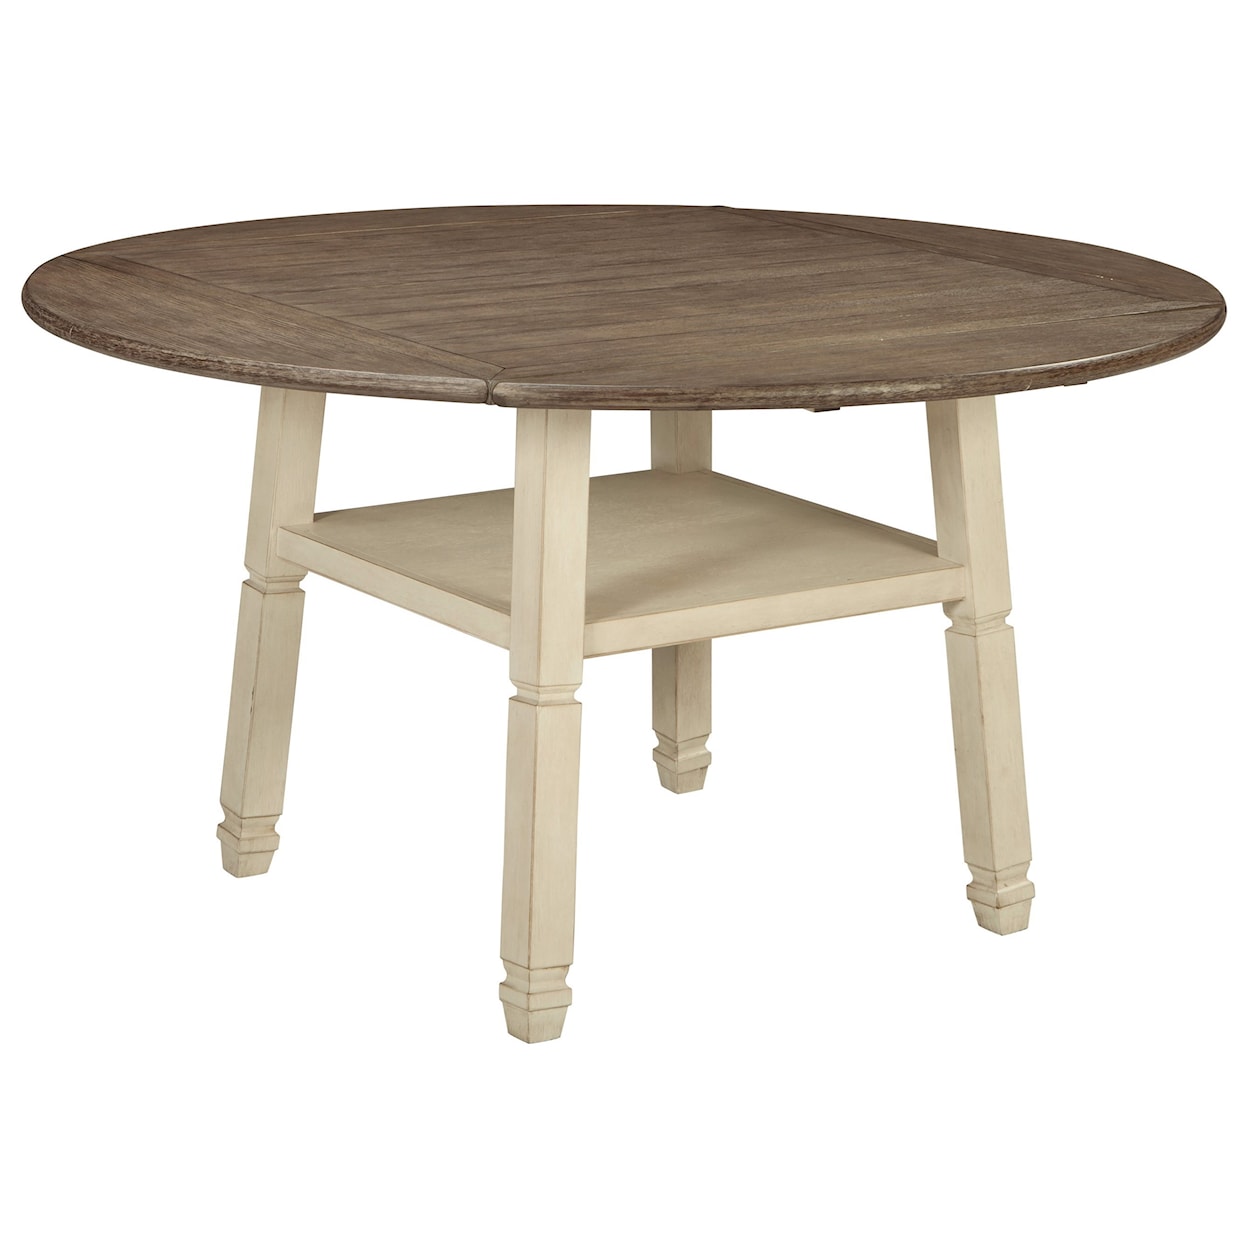 Signature Design by Ashley Bolanburg Round Drop Leaf Counter Table